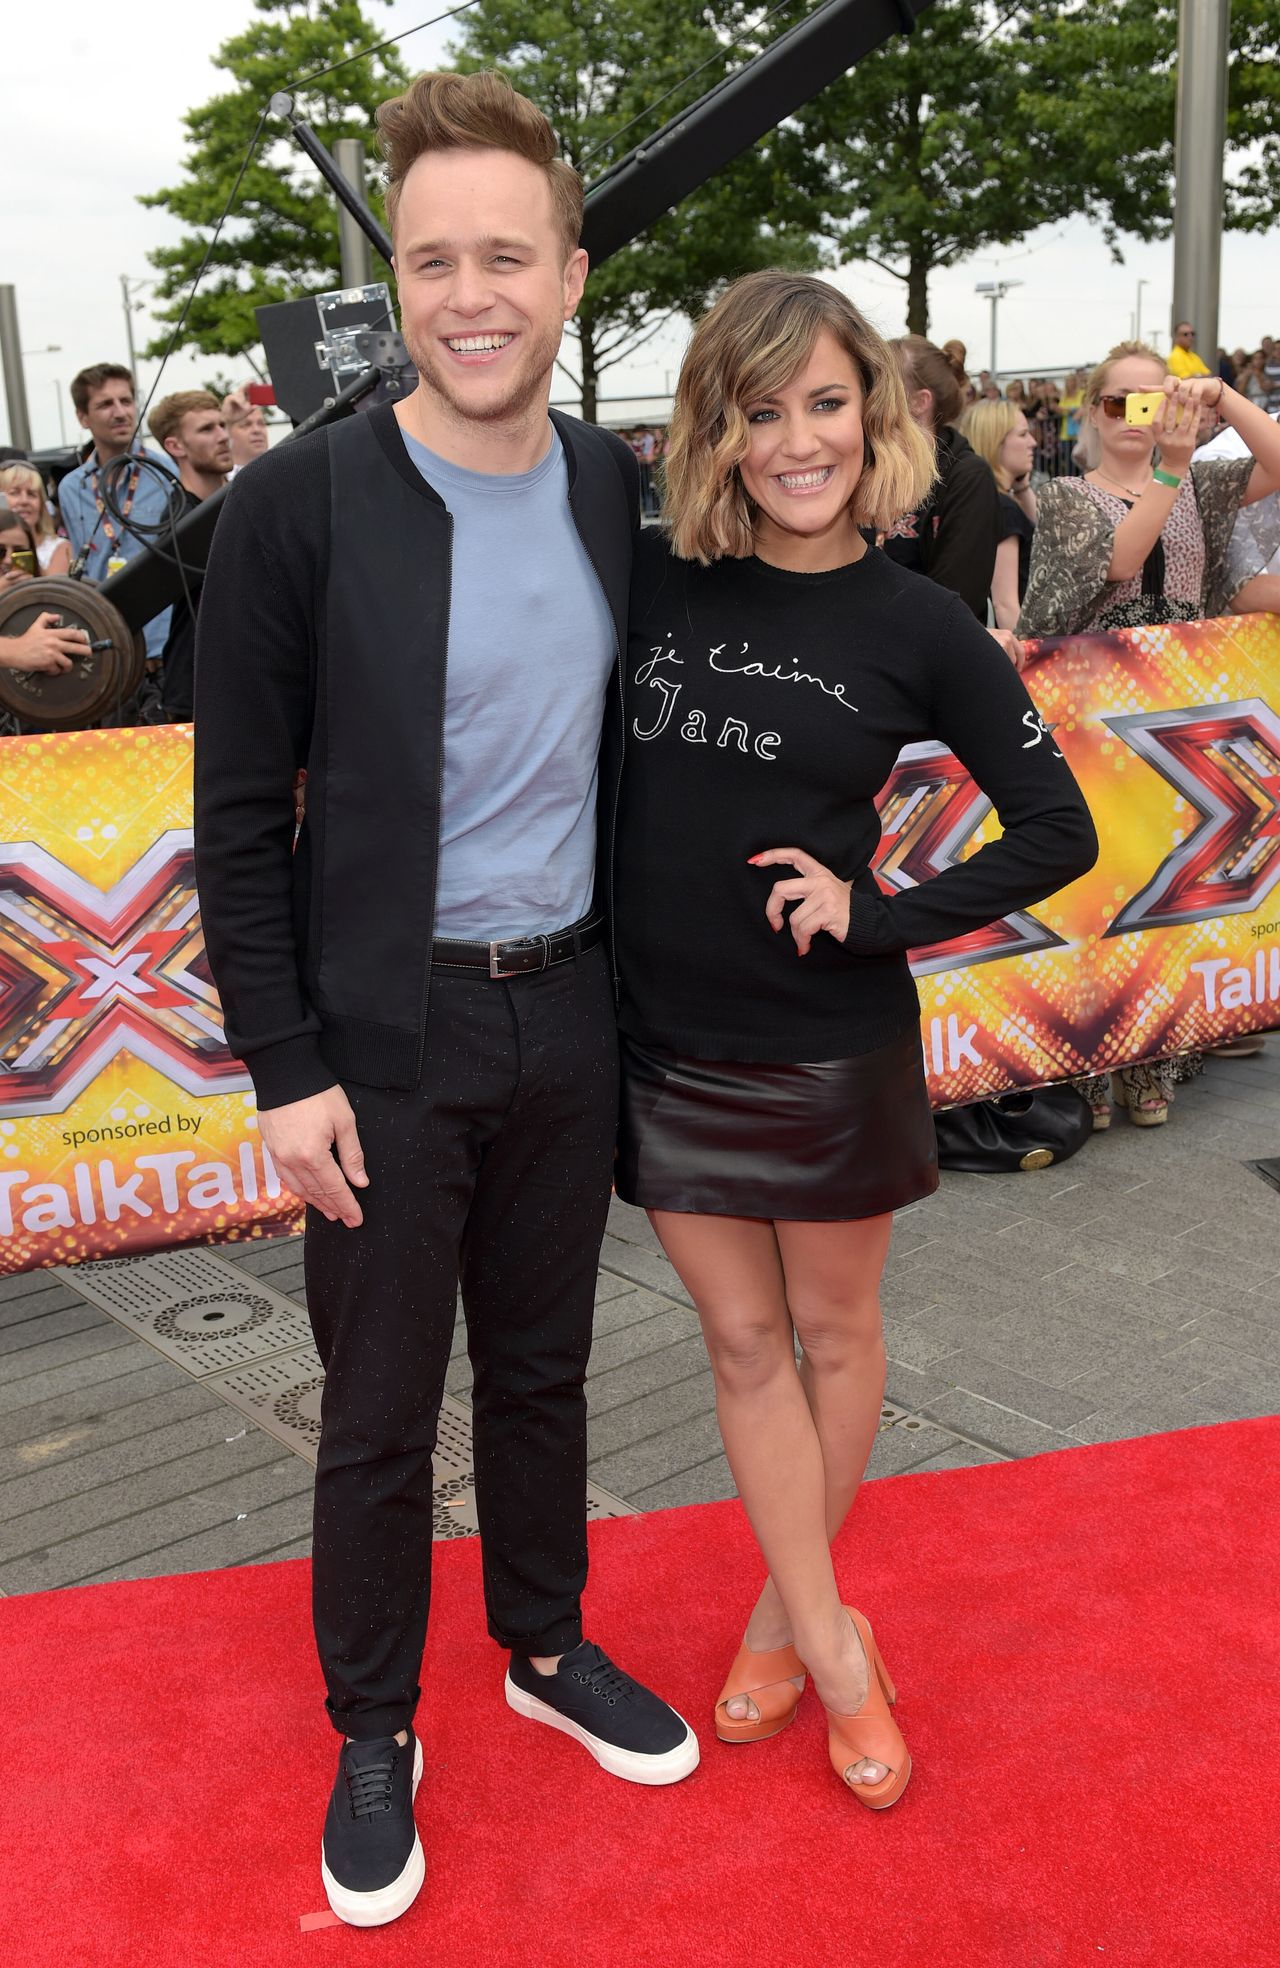 Caroline with X Factor co-host Olly Murs in 2015